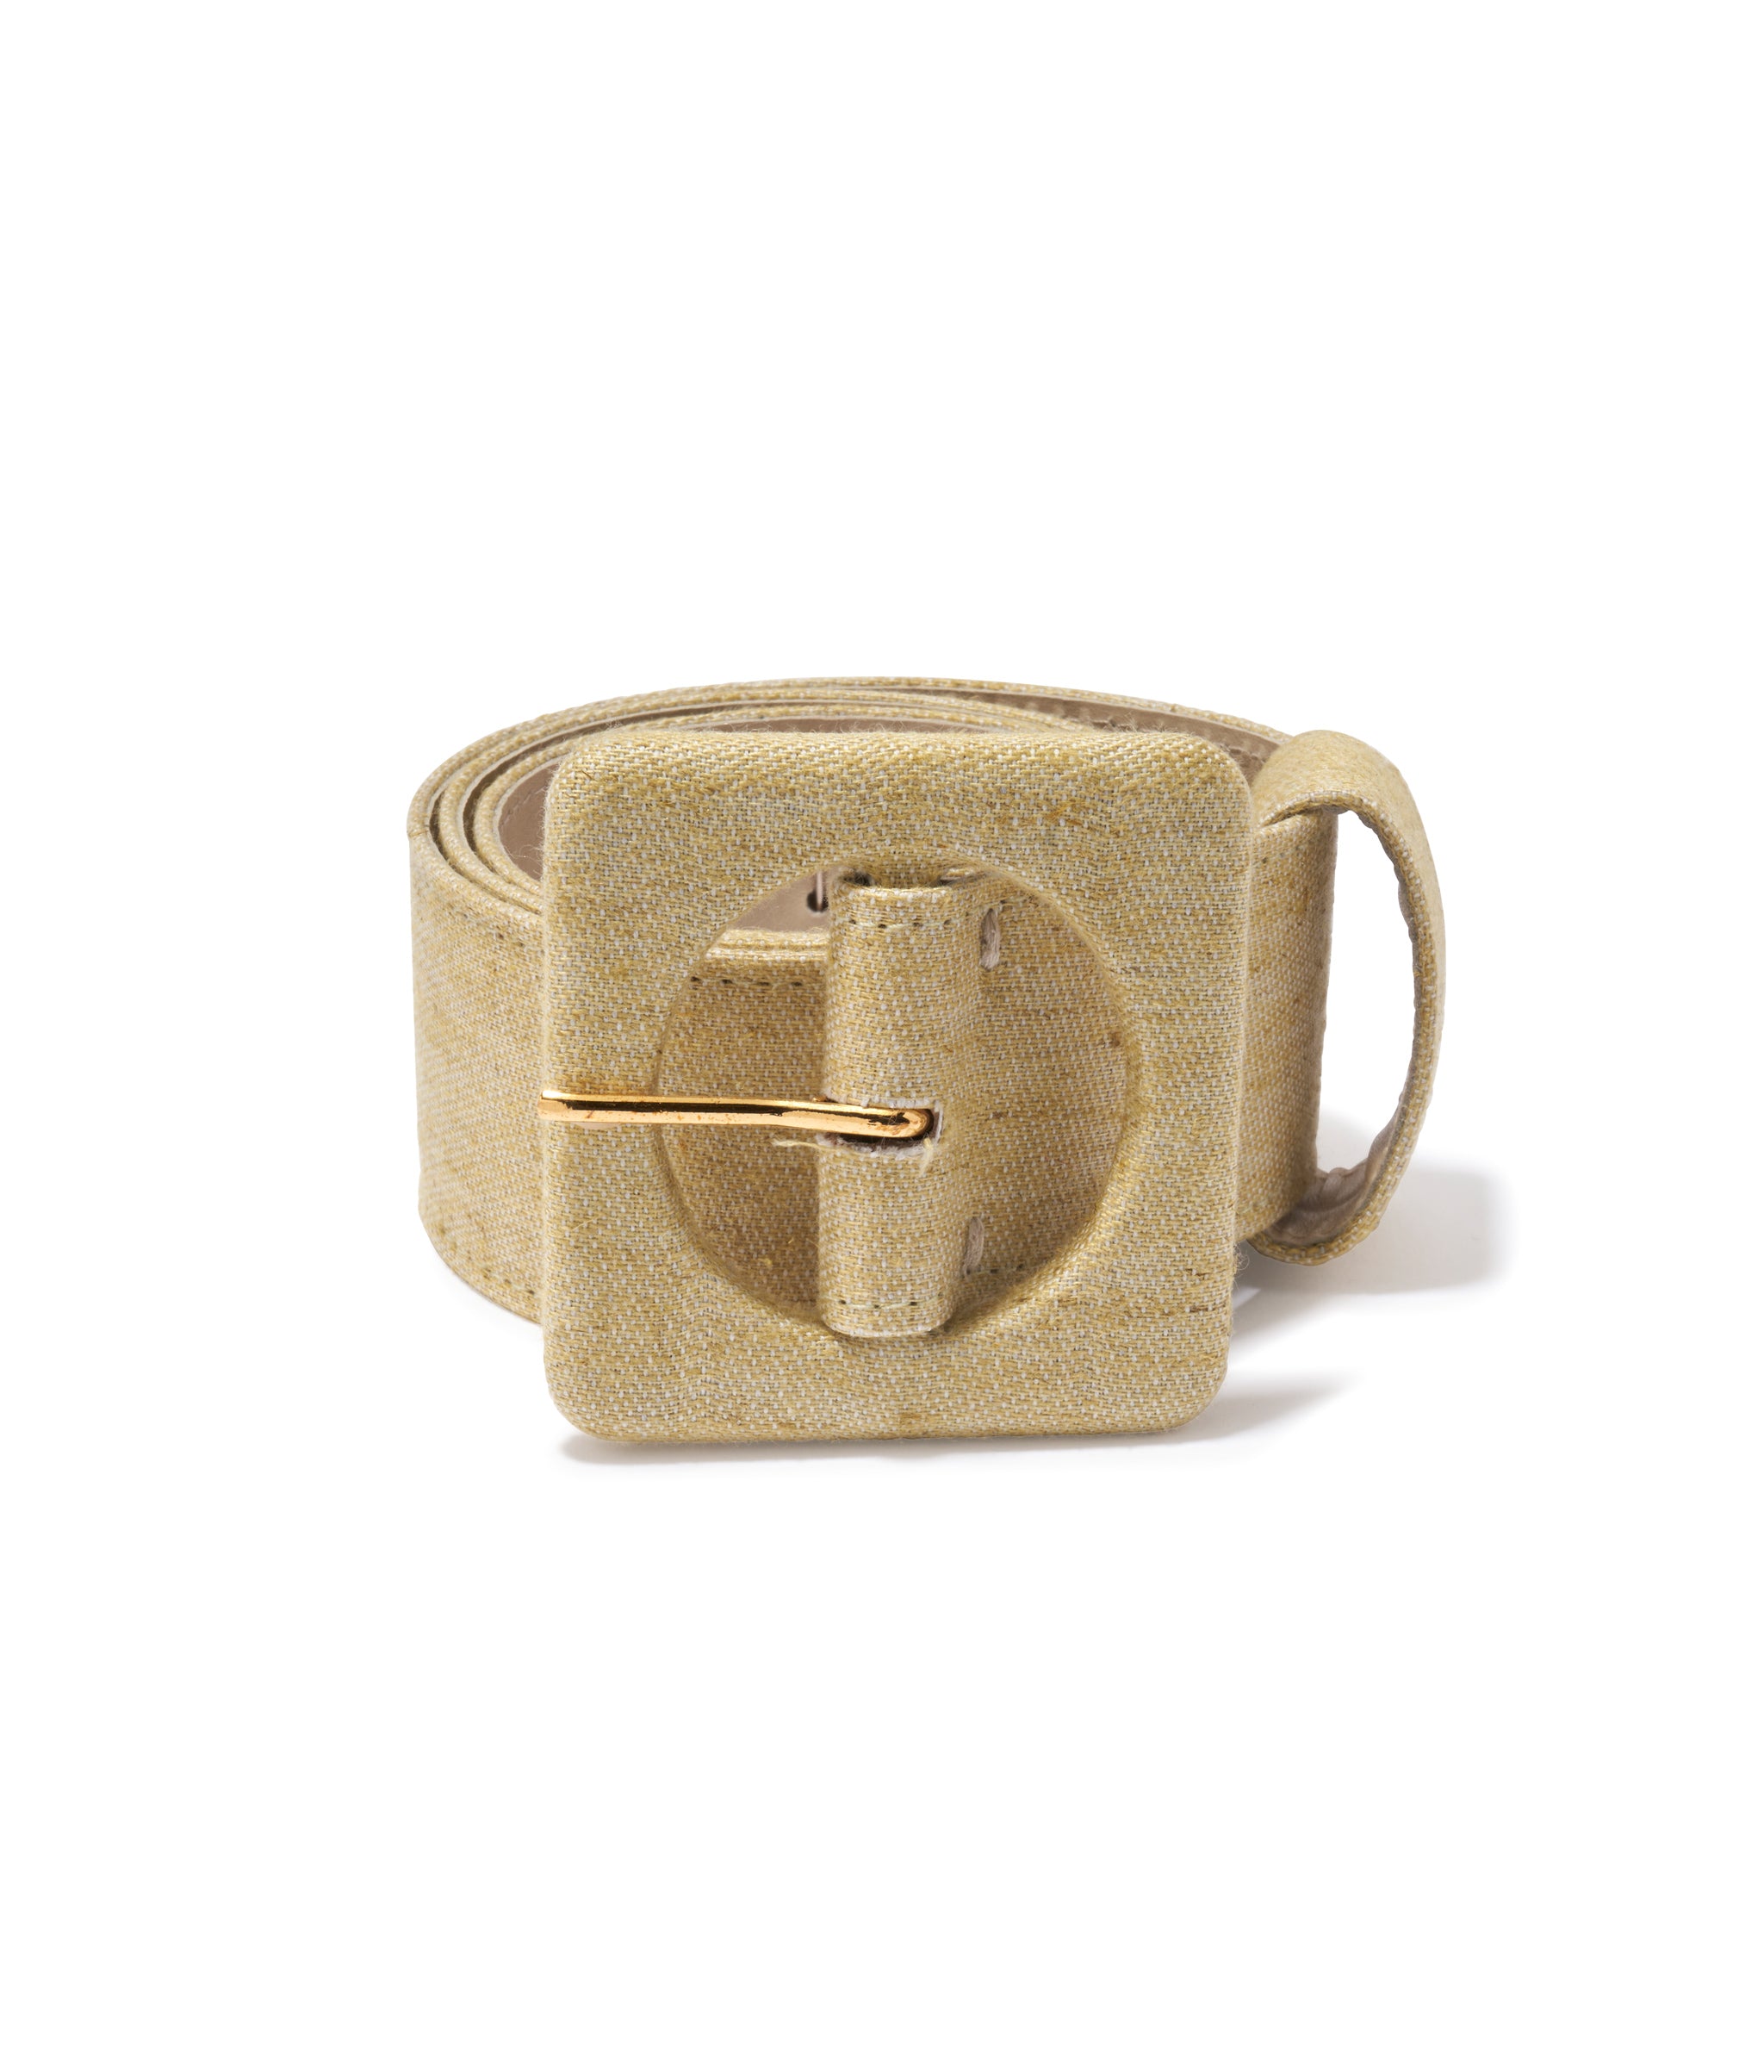 Agnes Belt in Citron Twill. Wide rolled-up belt in a warm tan twill, with square fabric-covered buckle.